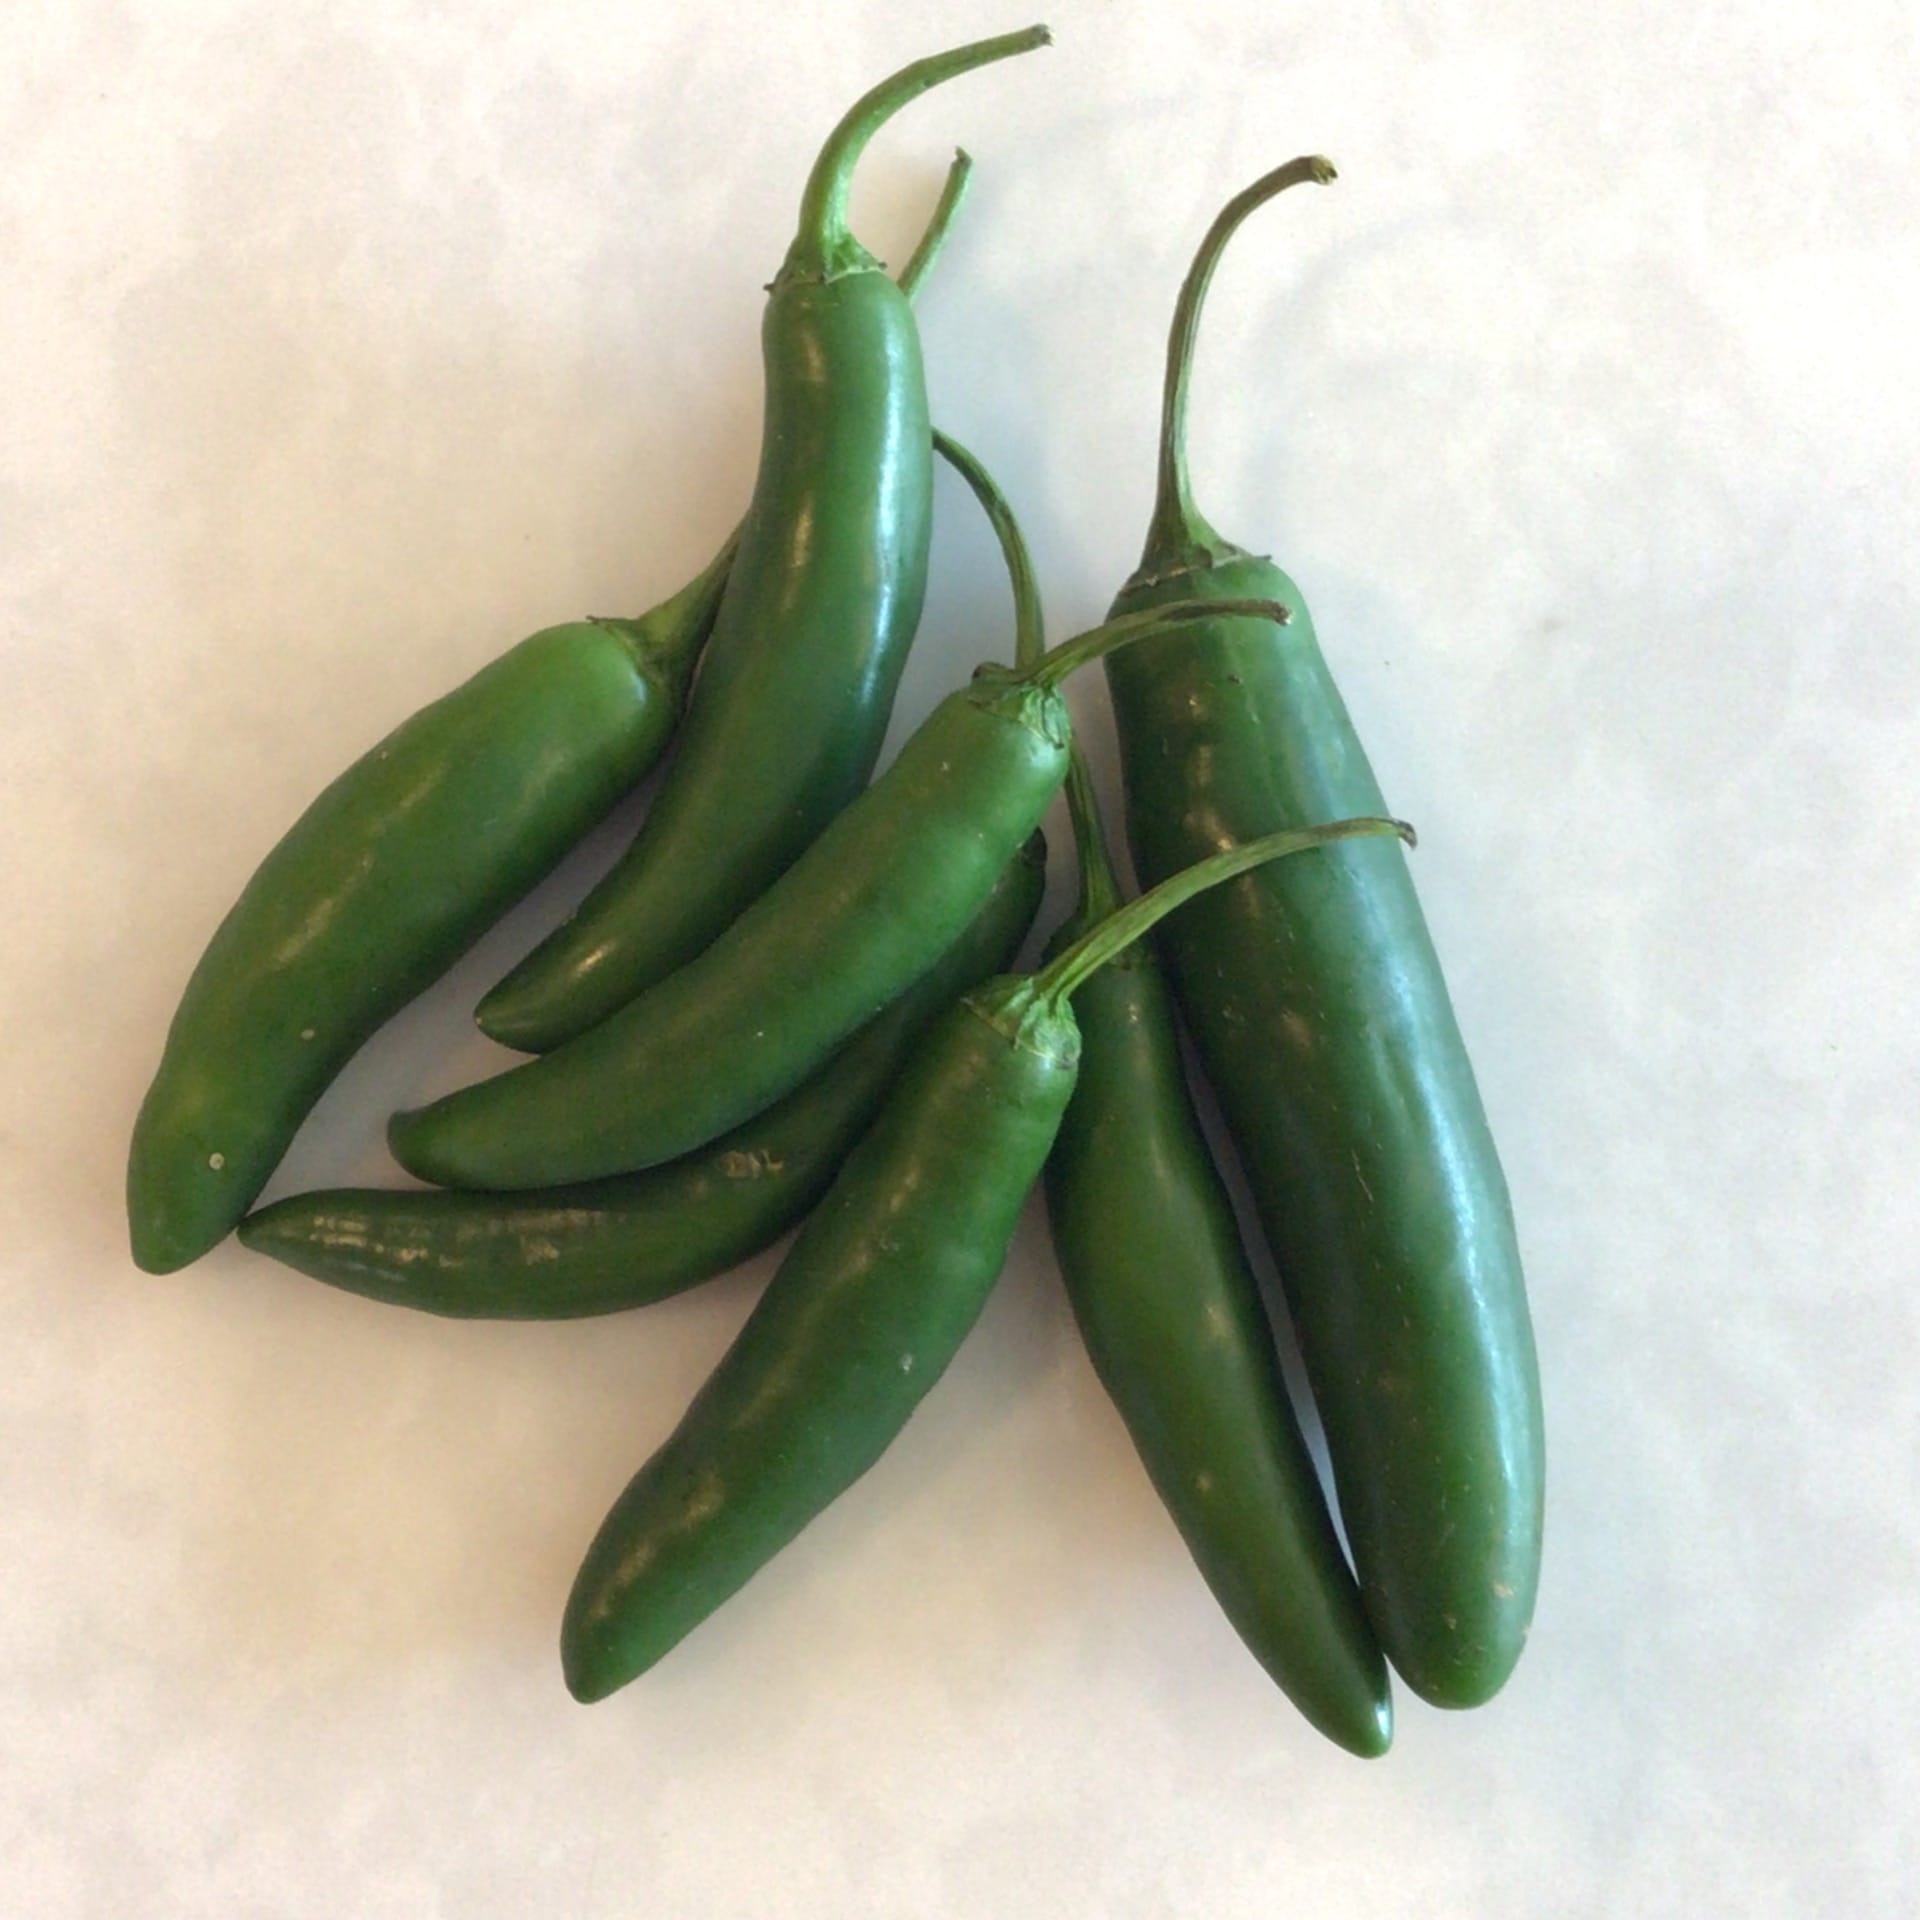 sold out sale serrano peppers